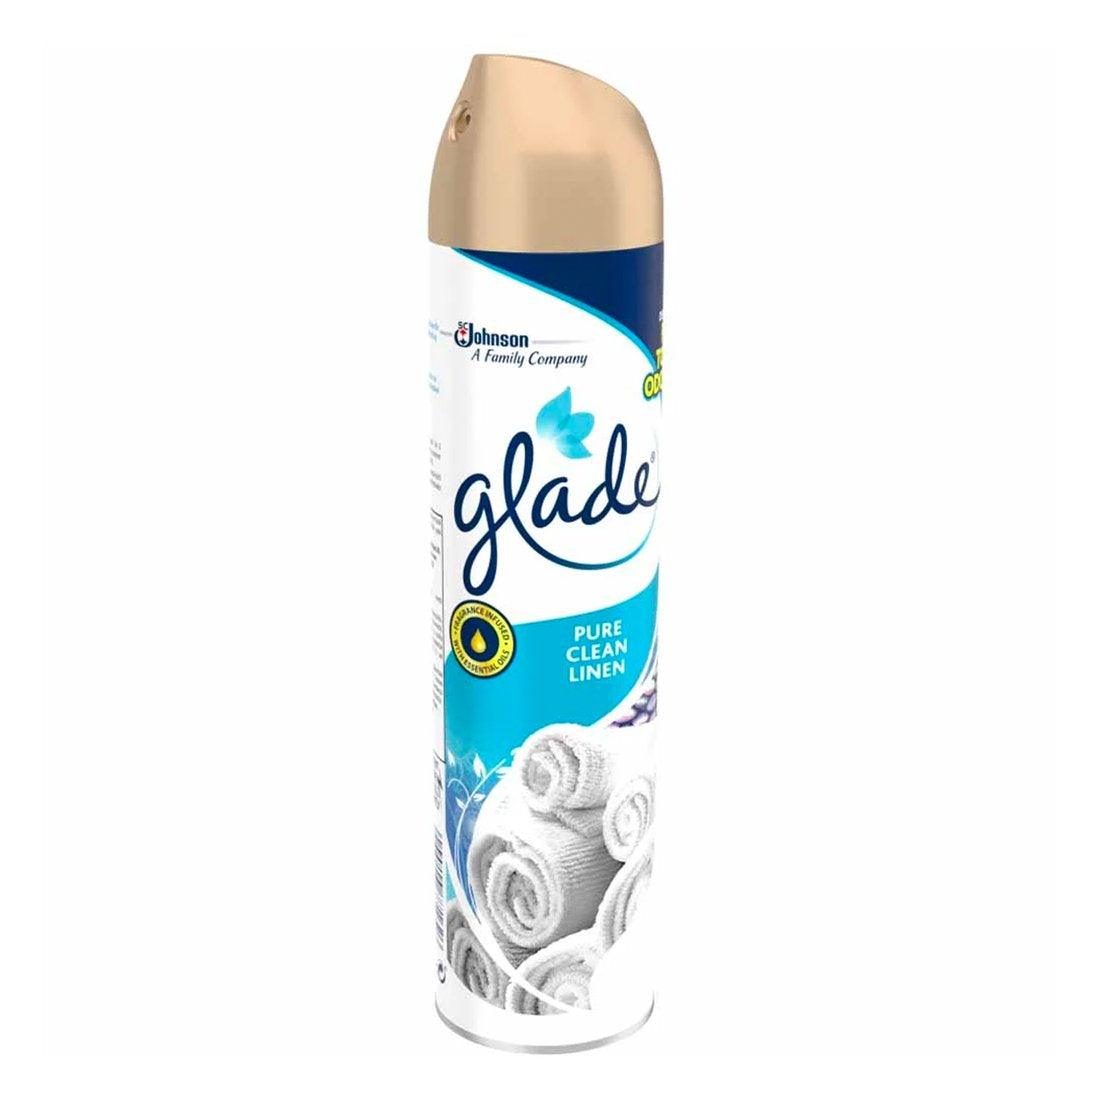 Glade 5 in 1 Air Freshener - Clean Linen - Vending Superstore